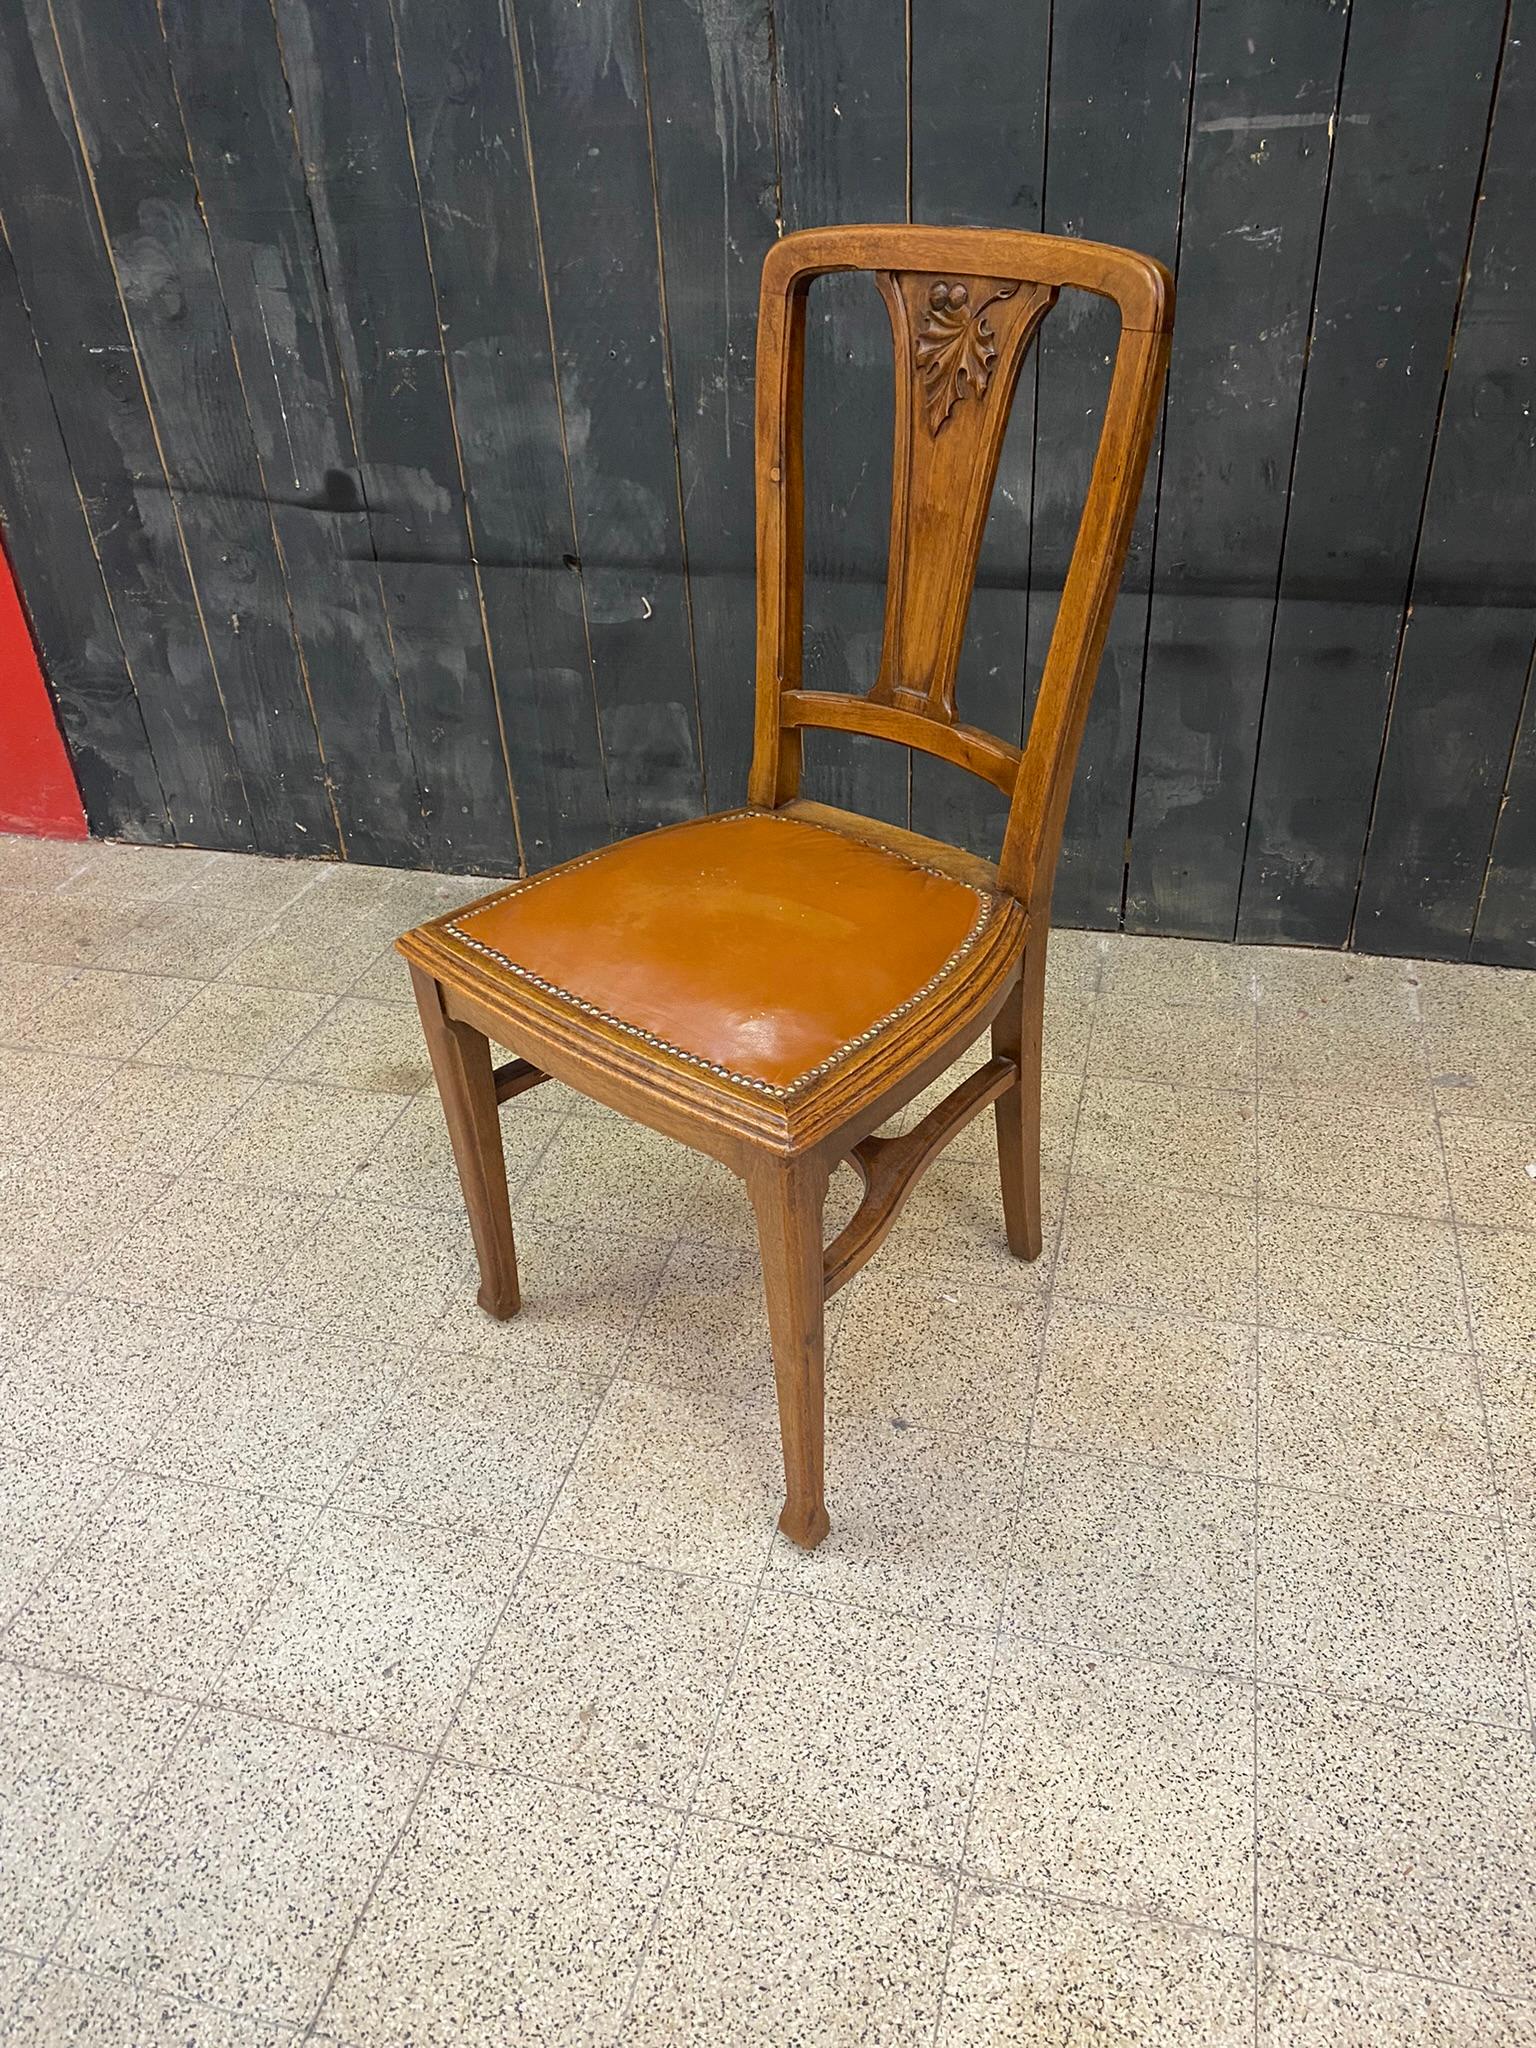 Attributed to Gauthier-Poinsignon & Cie, 6 Art Nouveau Chairs Leather Seats For Sale 3